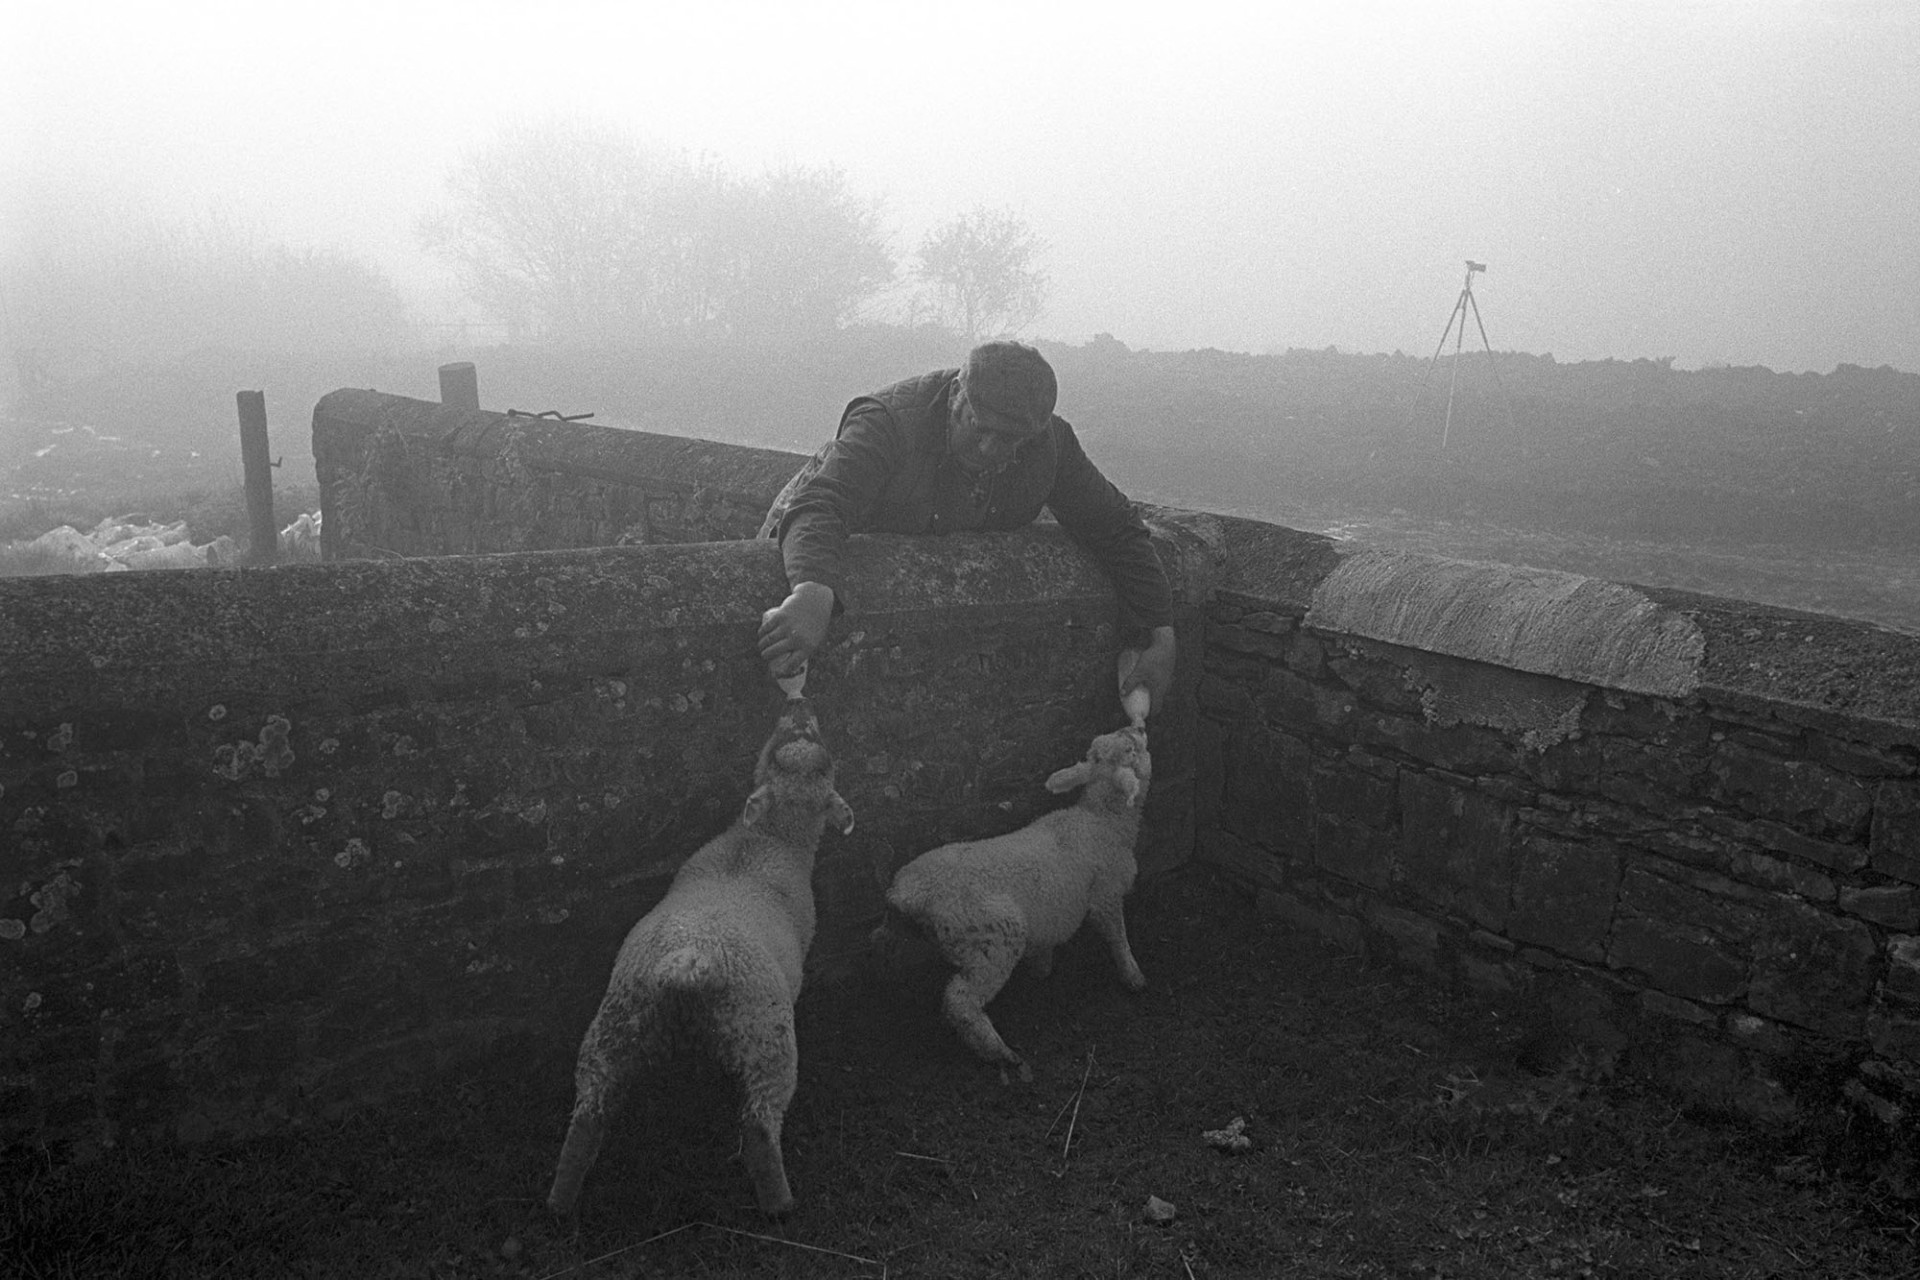 Shepherd feeding two lambs simultaneously leaning over wall. 
[John Moyes bottle feeding two lambs over a stone wall at Brookland, Chulmleigh.]